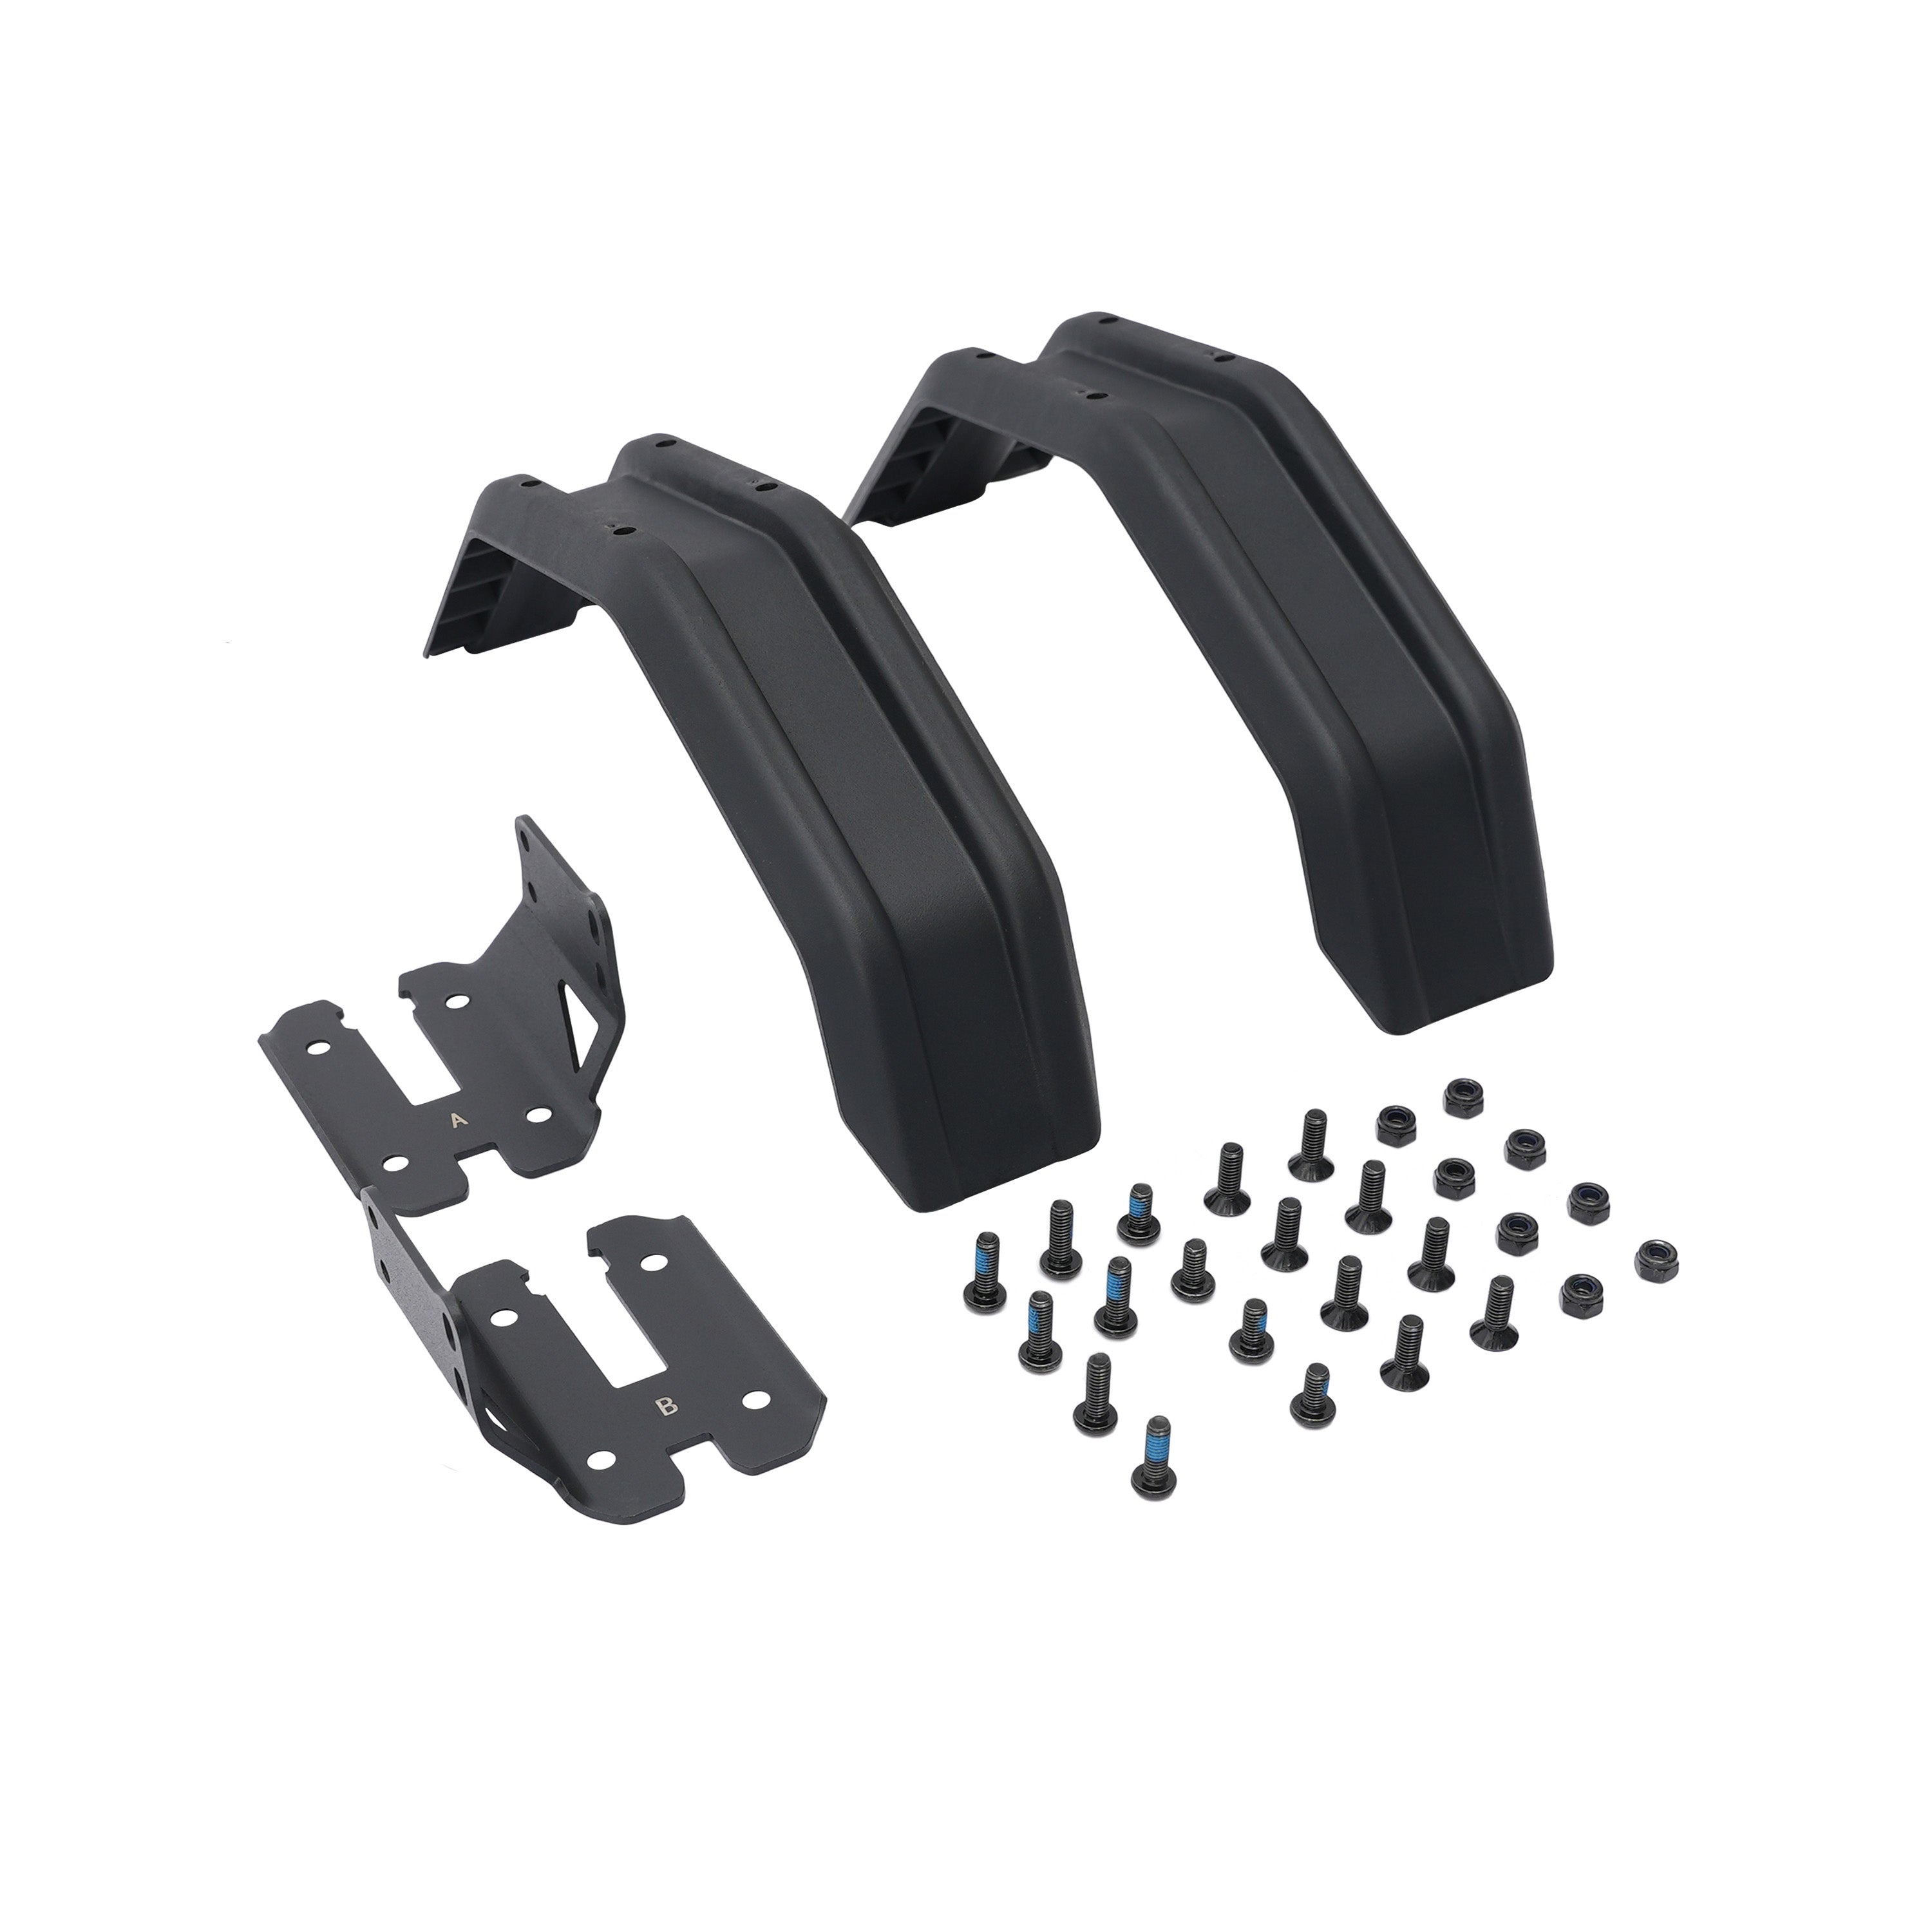 Off-Road Mud Guards for Atlas series